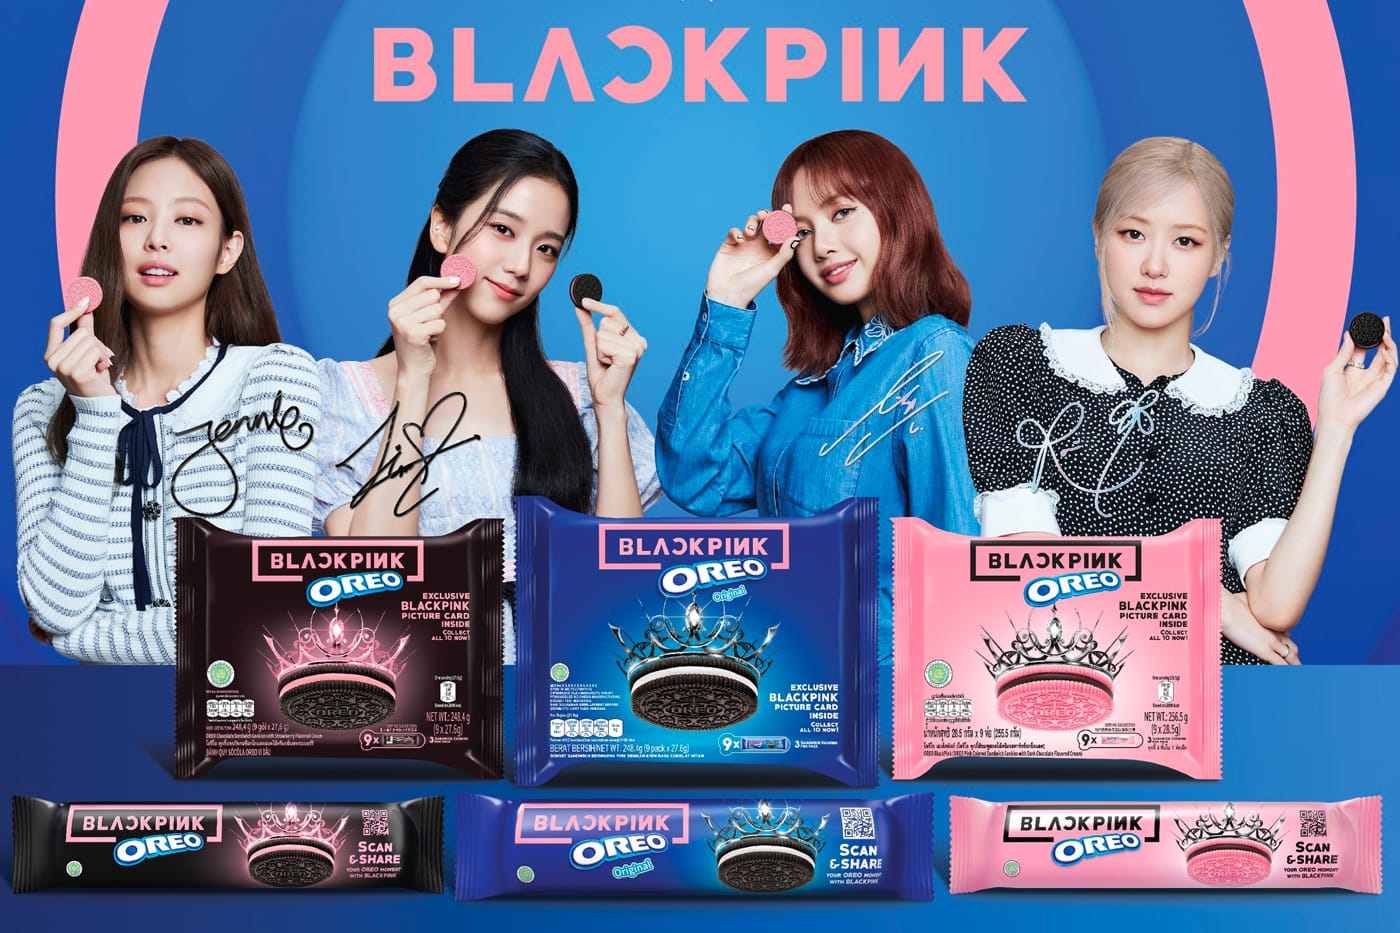 https%3A%2F%2Fhypebeast.com%2Fimage%2F2023%2F02%2Fblackpink-oreo-collab-ad-release-info-000.jpg